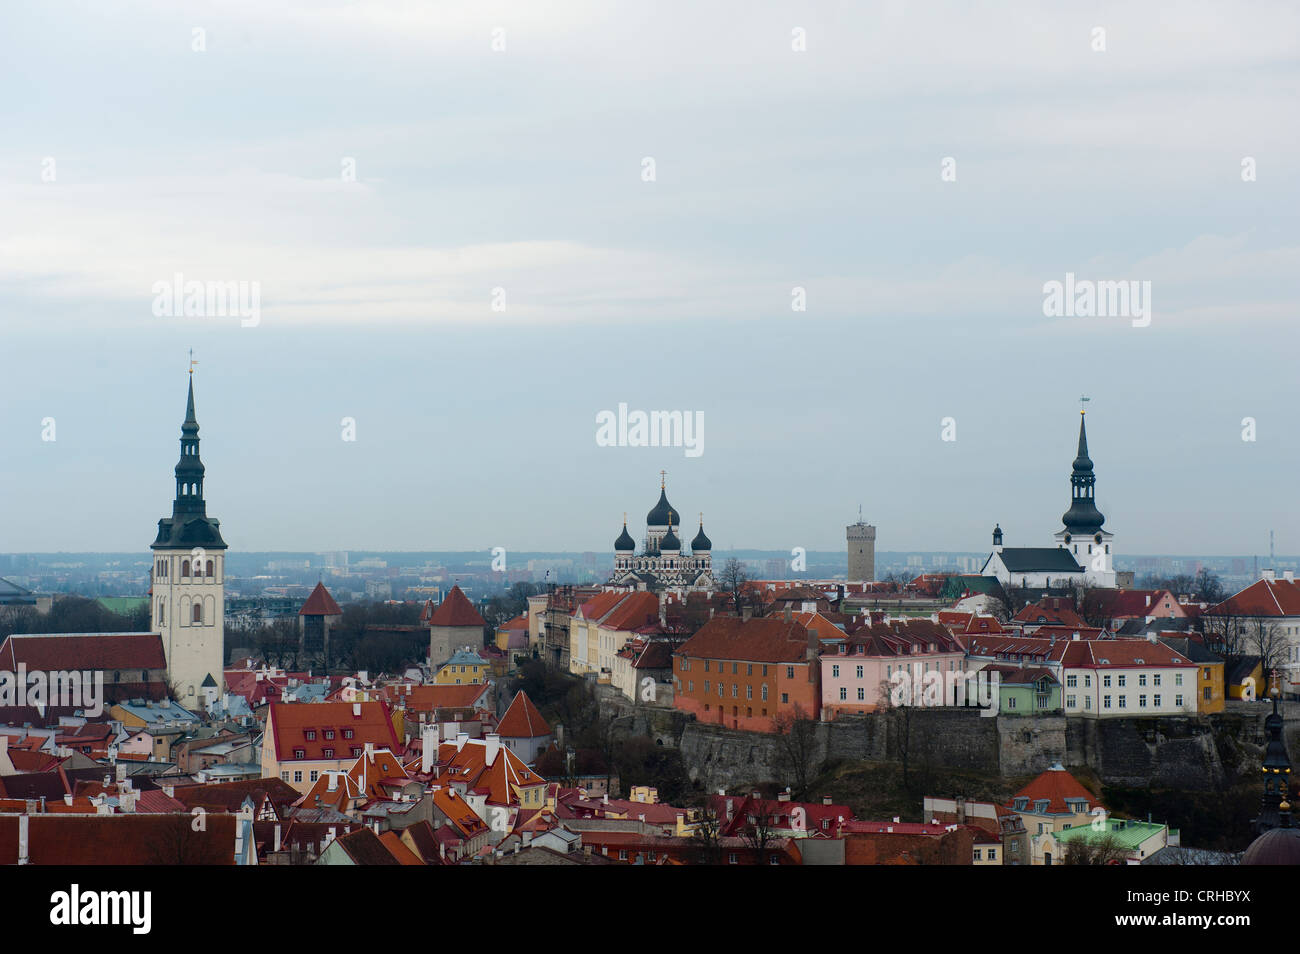 A view of St. Olafs Church, Alexander Nevsky Cathedral and the old town in Tallinn, Estonia, Baltic States Stock Photo